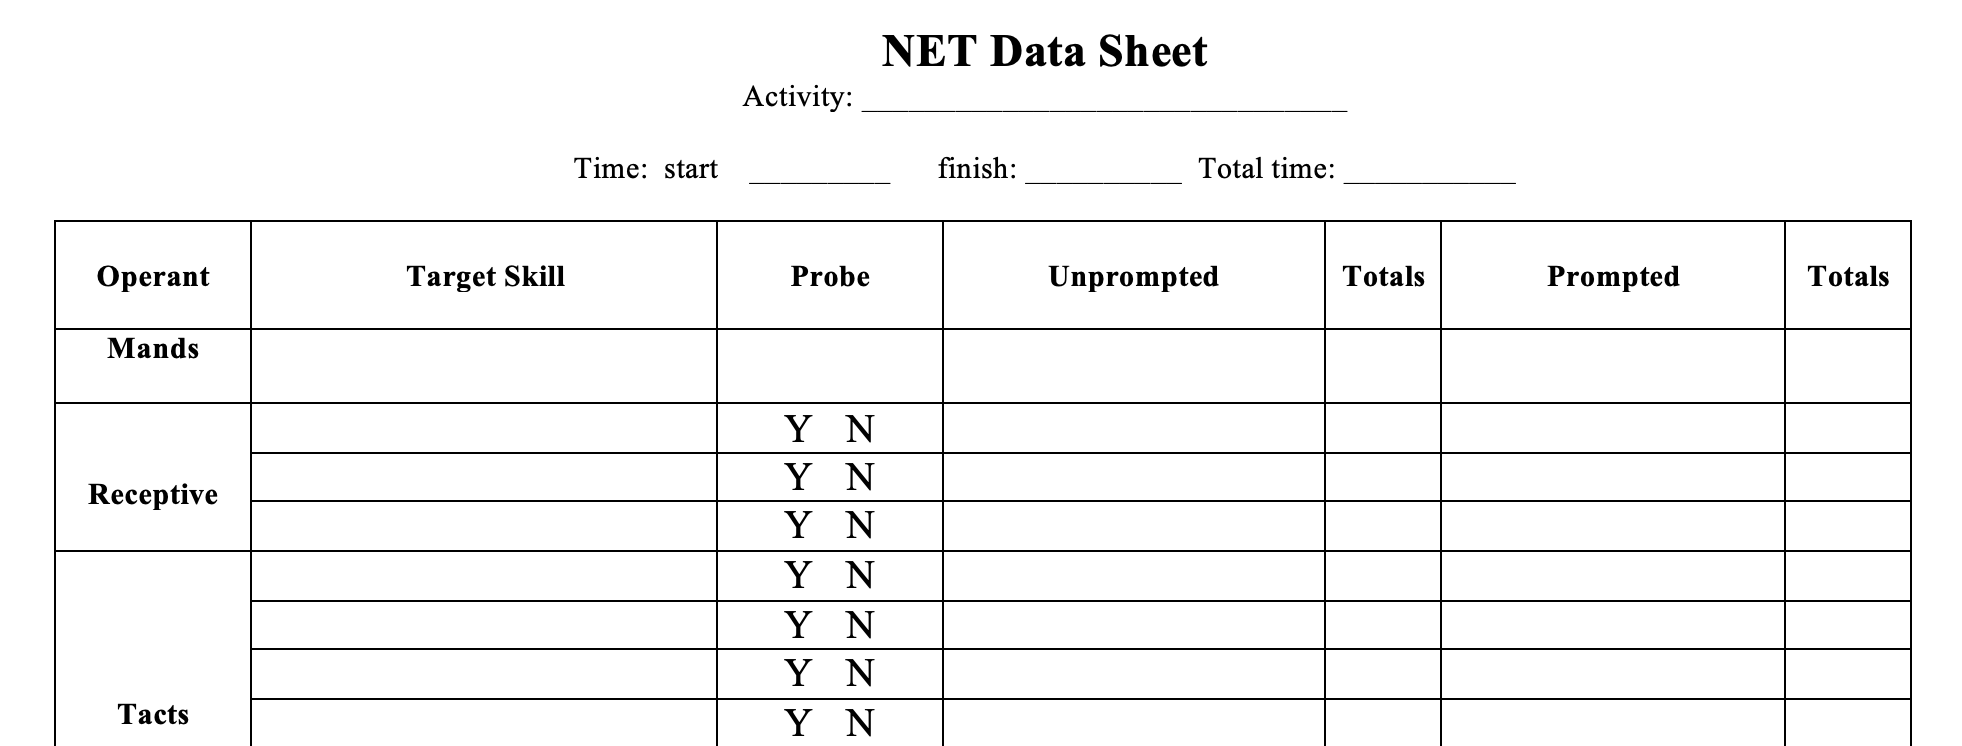 NET Data Sheet with Specific Targets